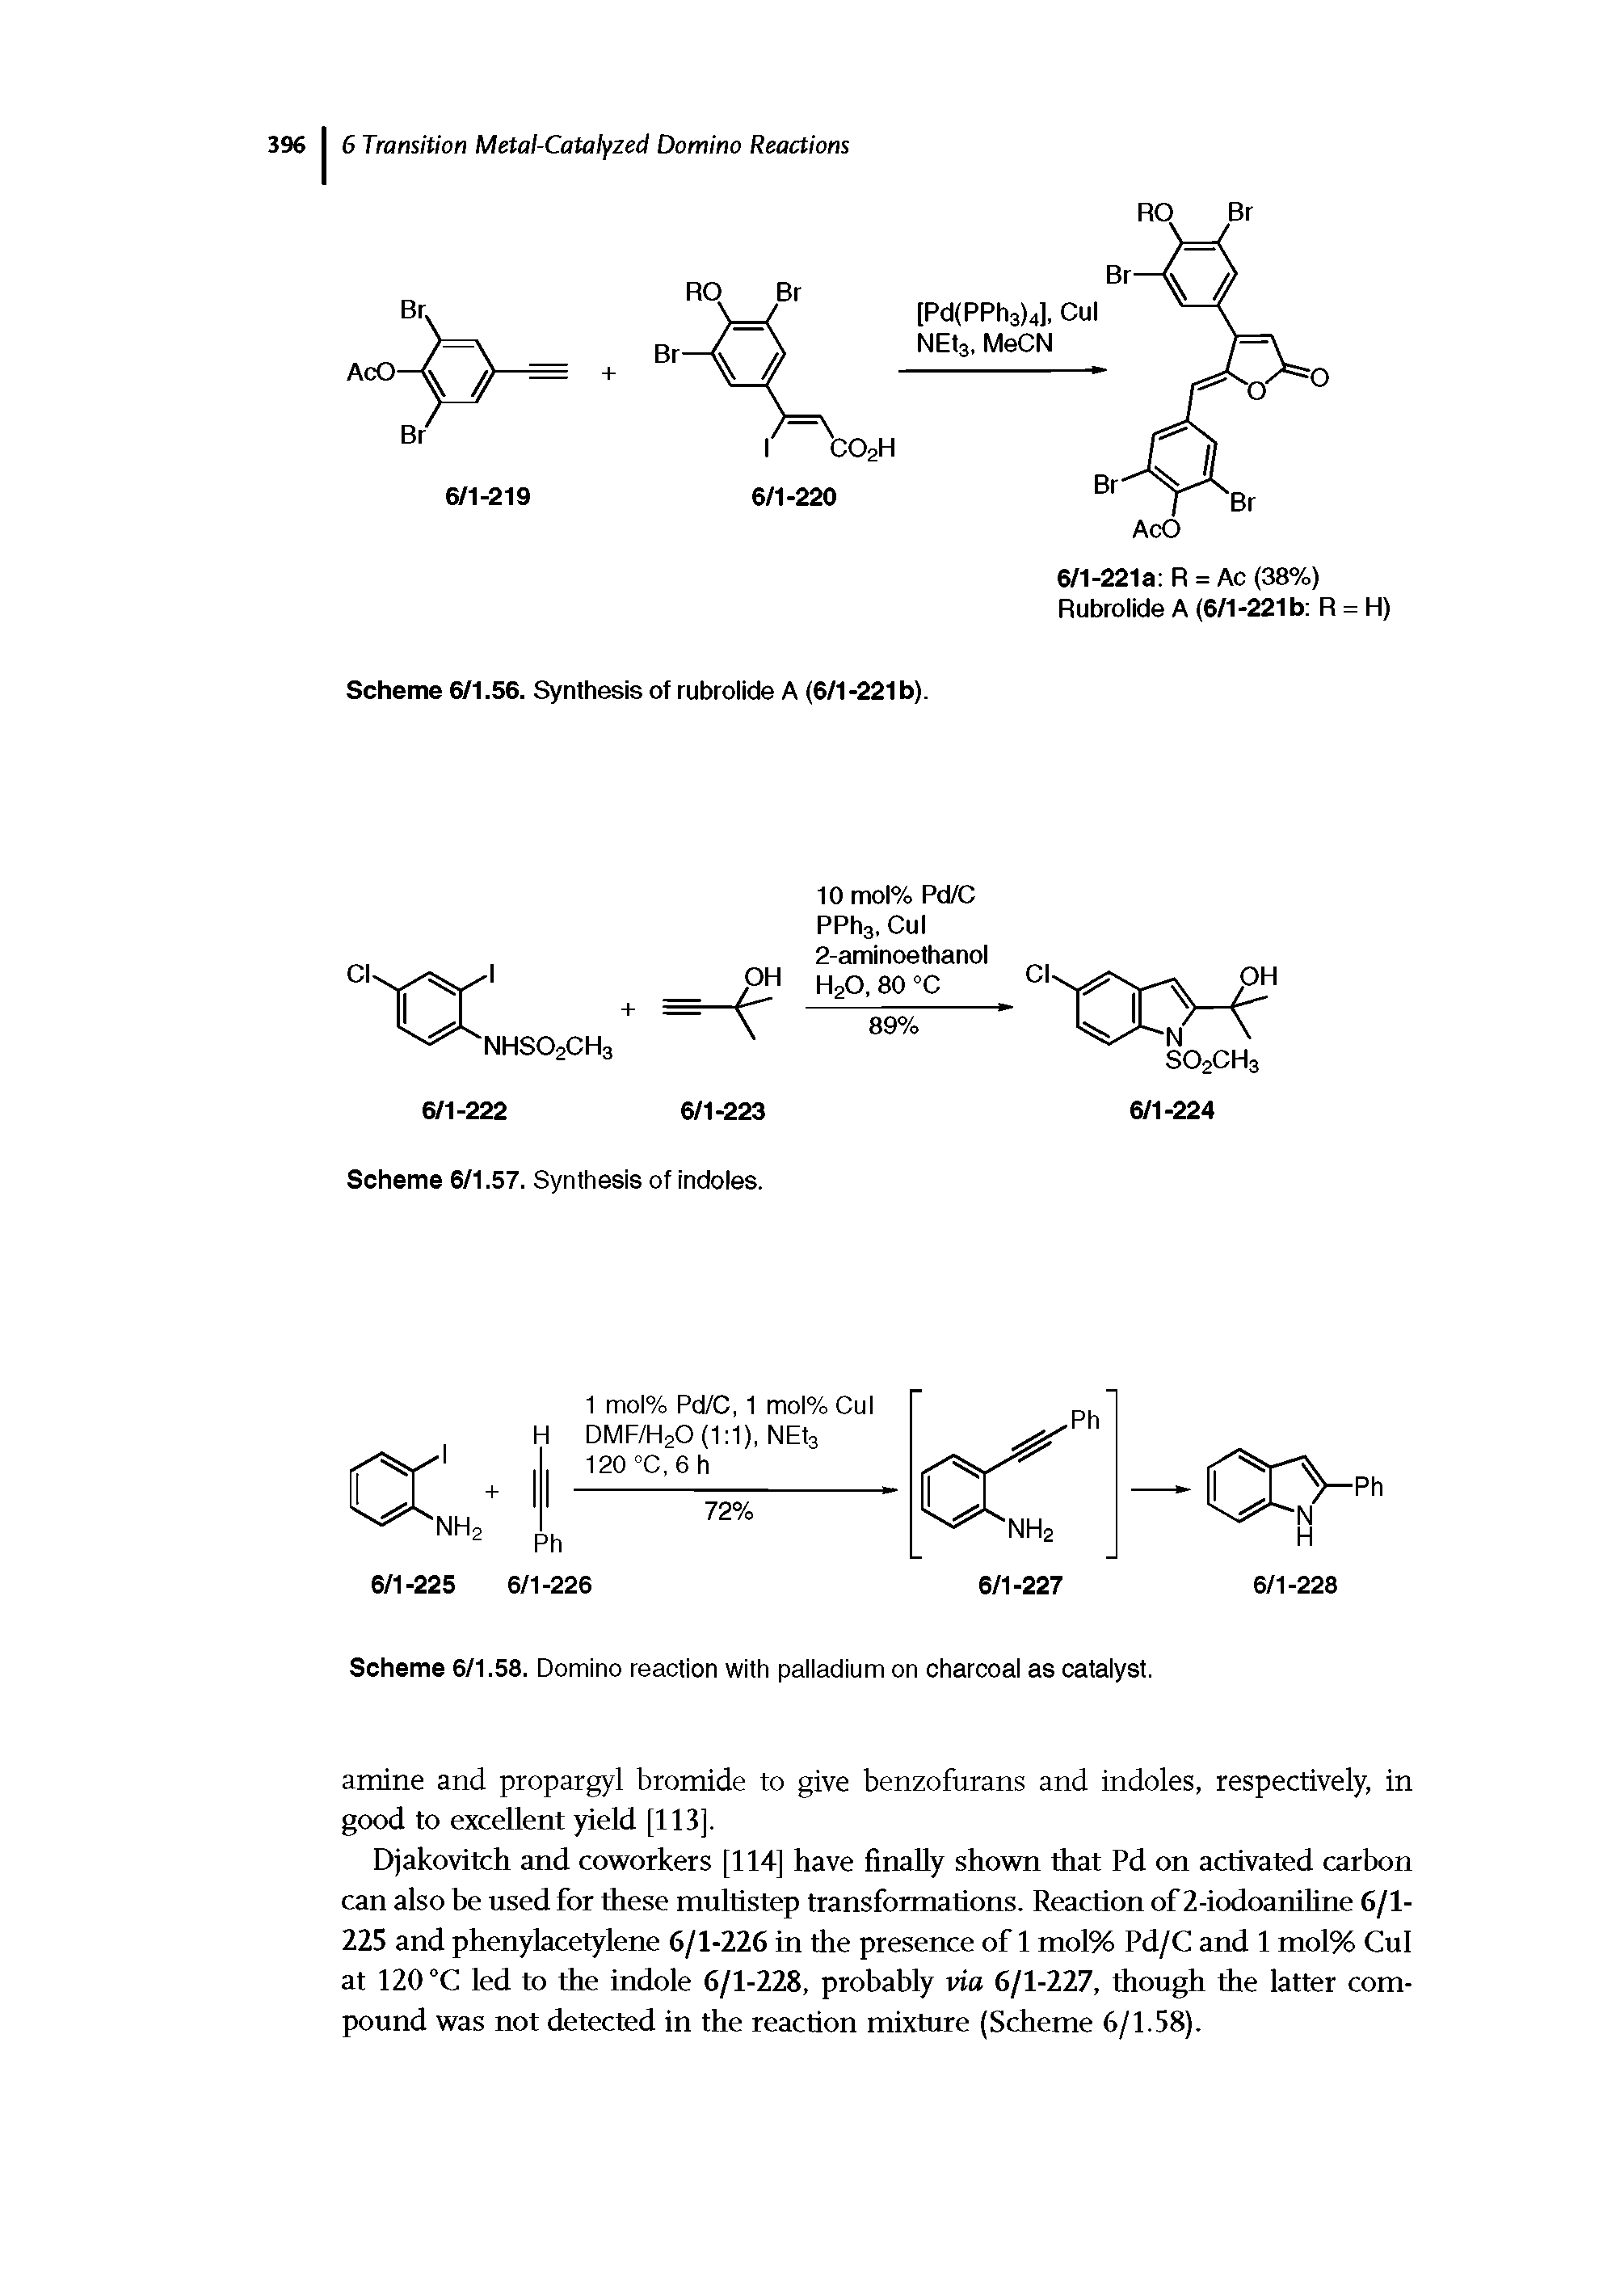 Scheme 6/1.58. Domino reaction with palladium on charcoal as catalyst.